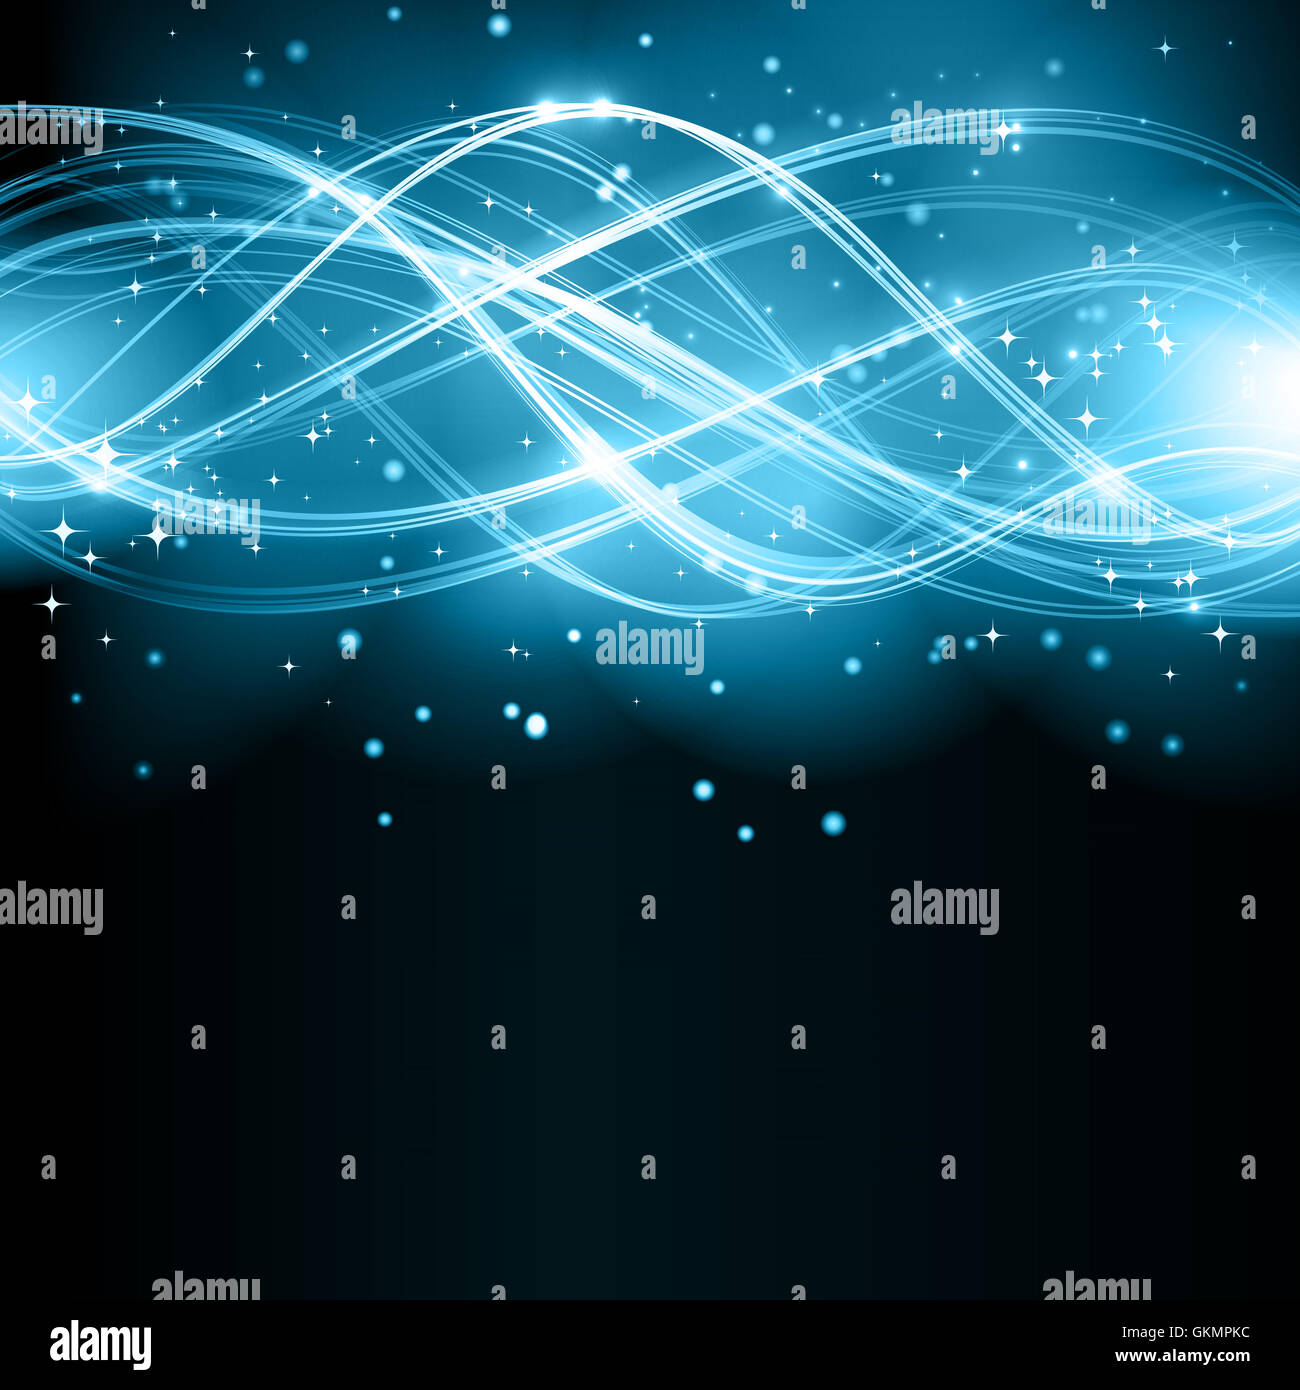 Abstract wave pattern with stars Stock Photo